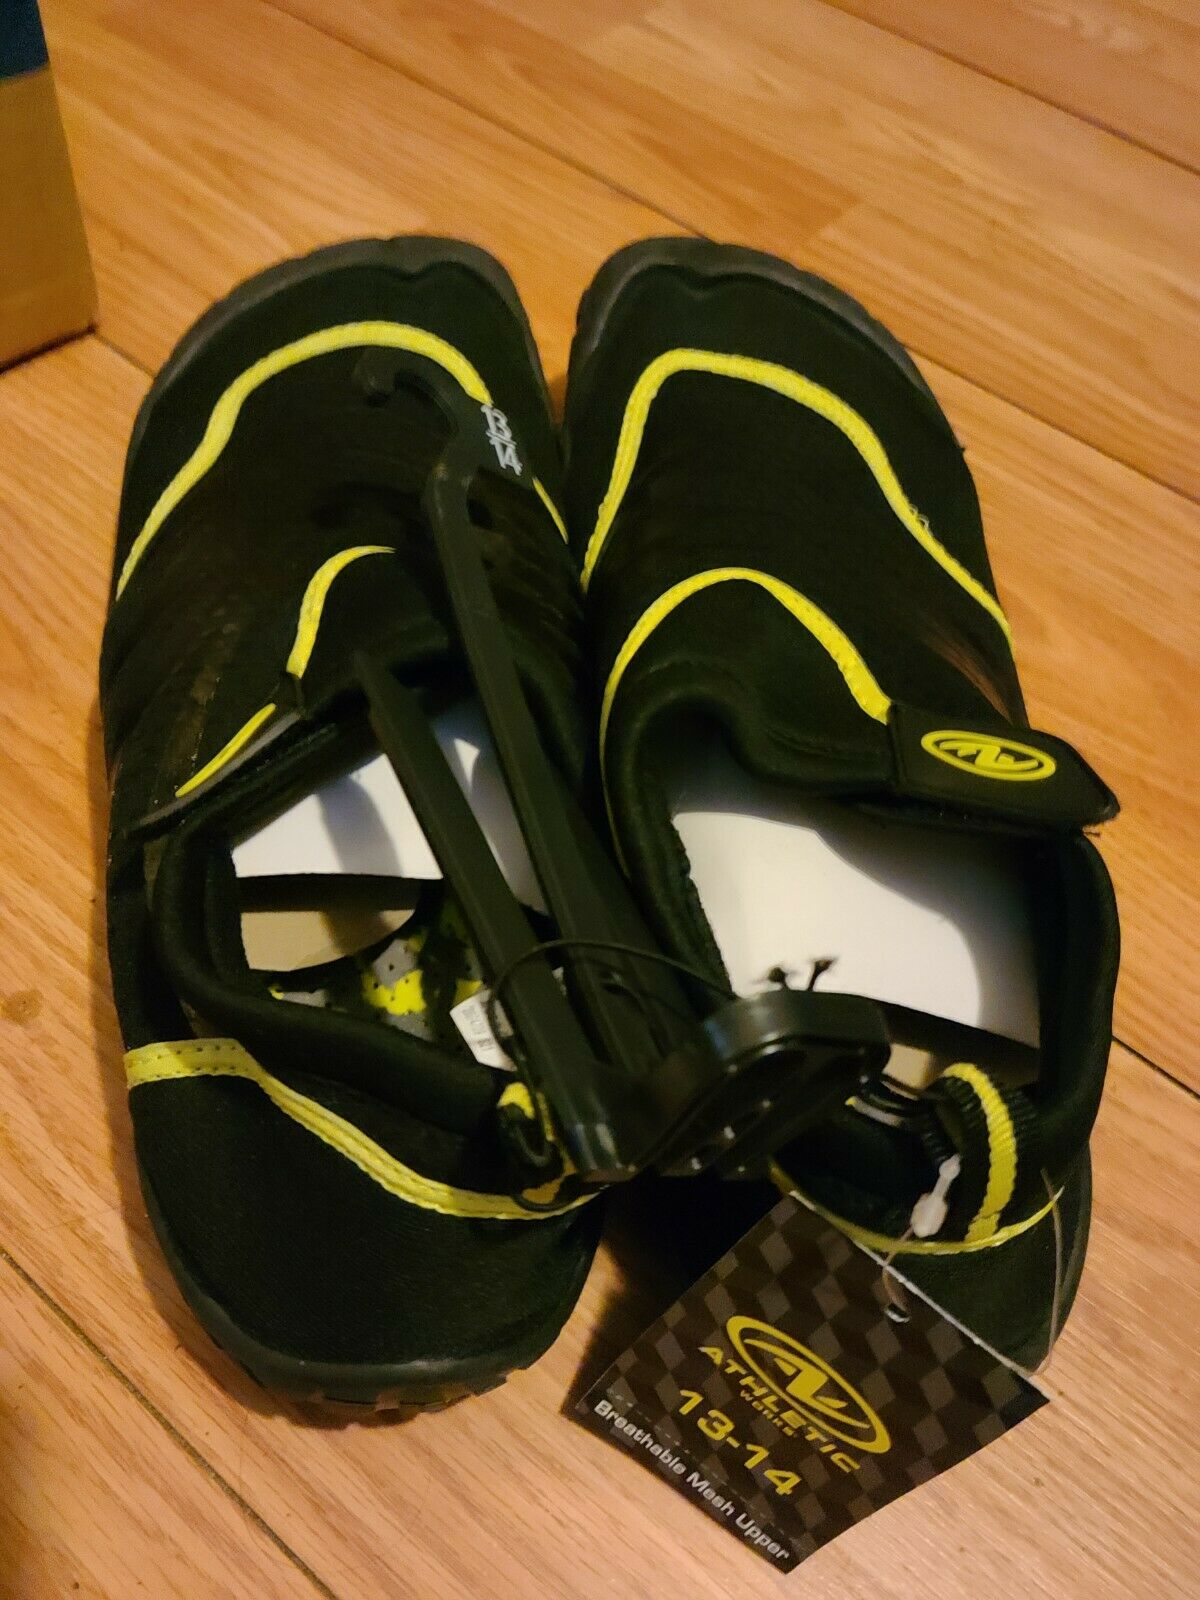 Nwt Mens Beach Shoes By Athlec Works Size 13/14 Black